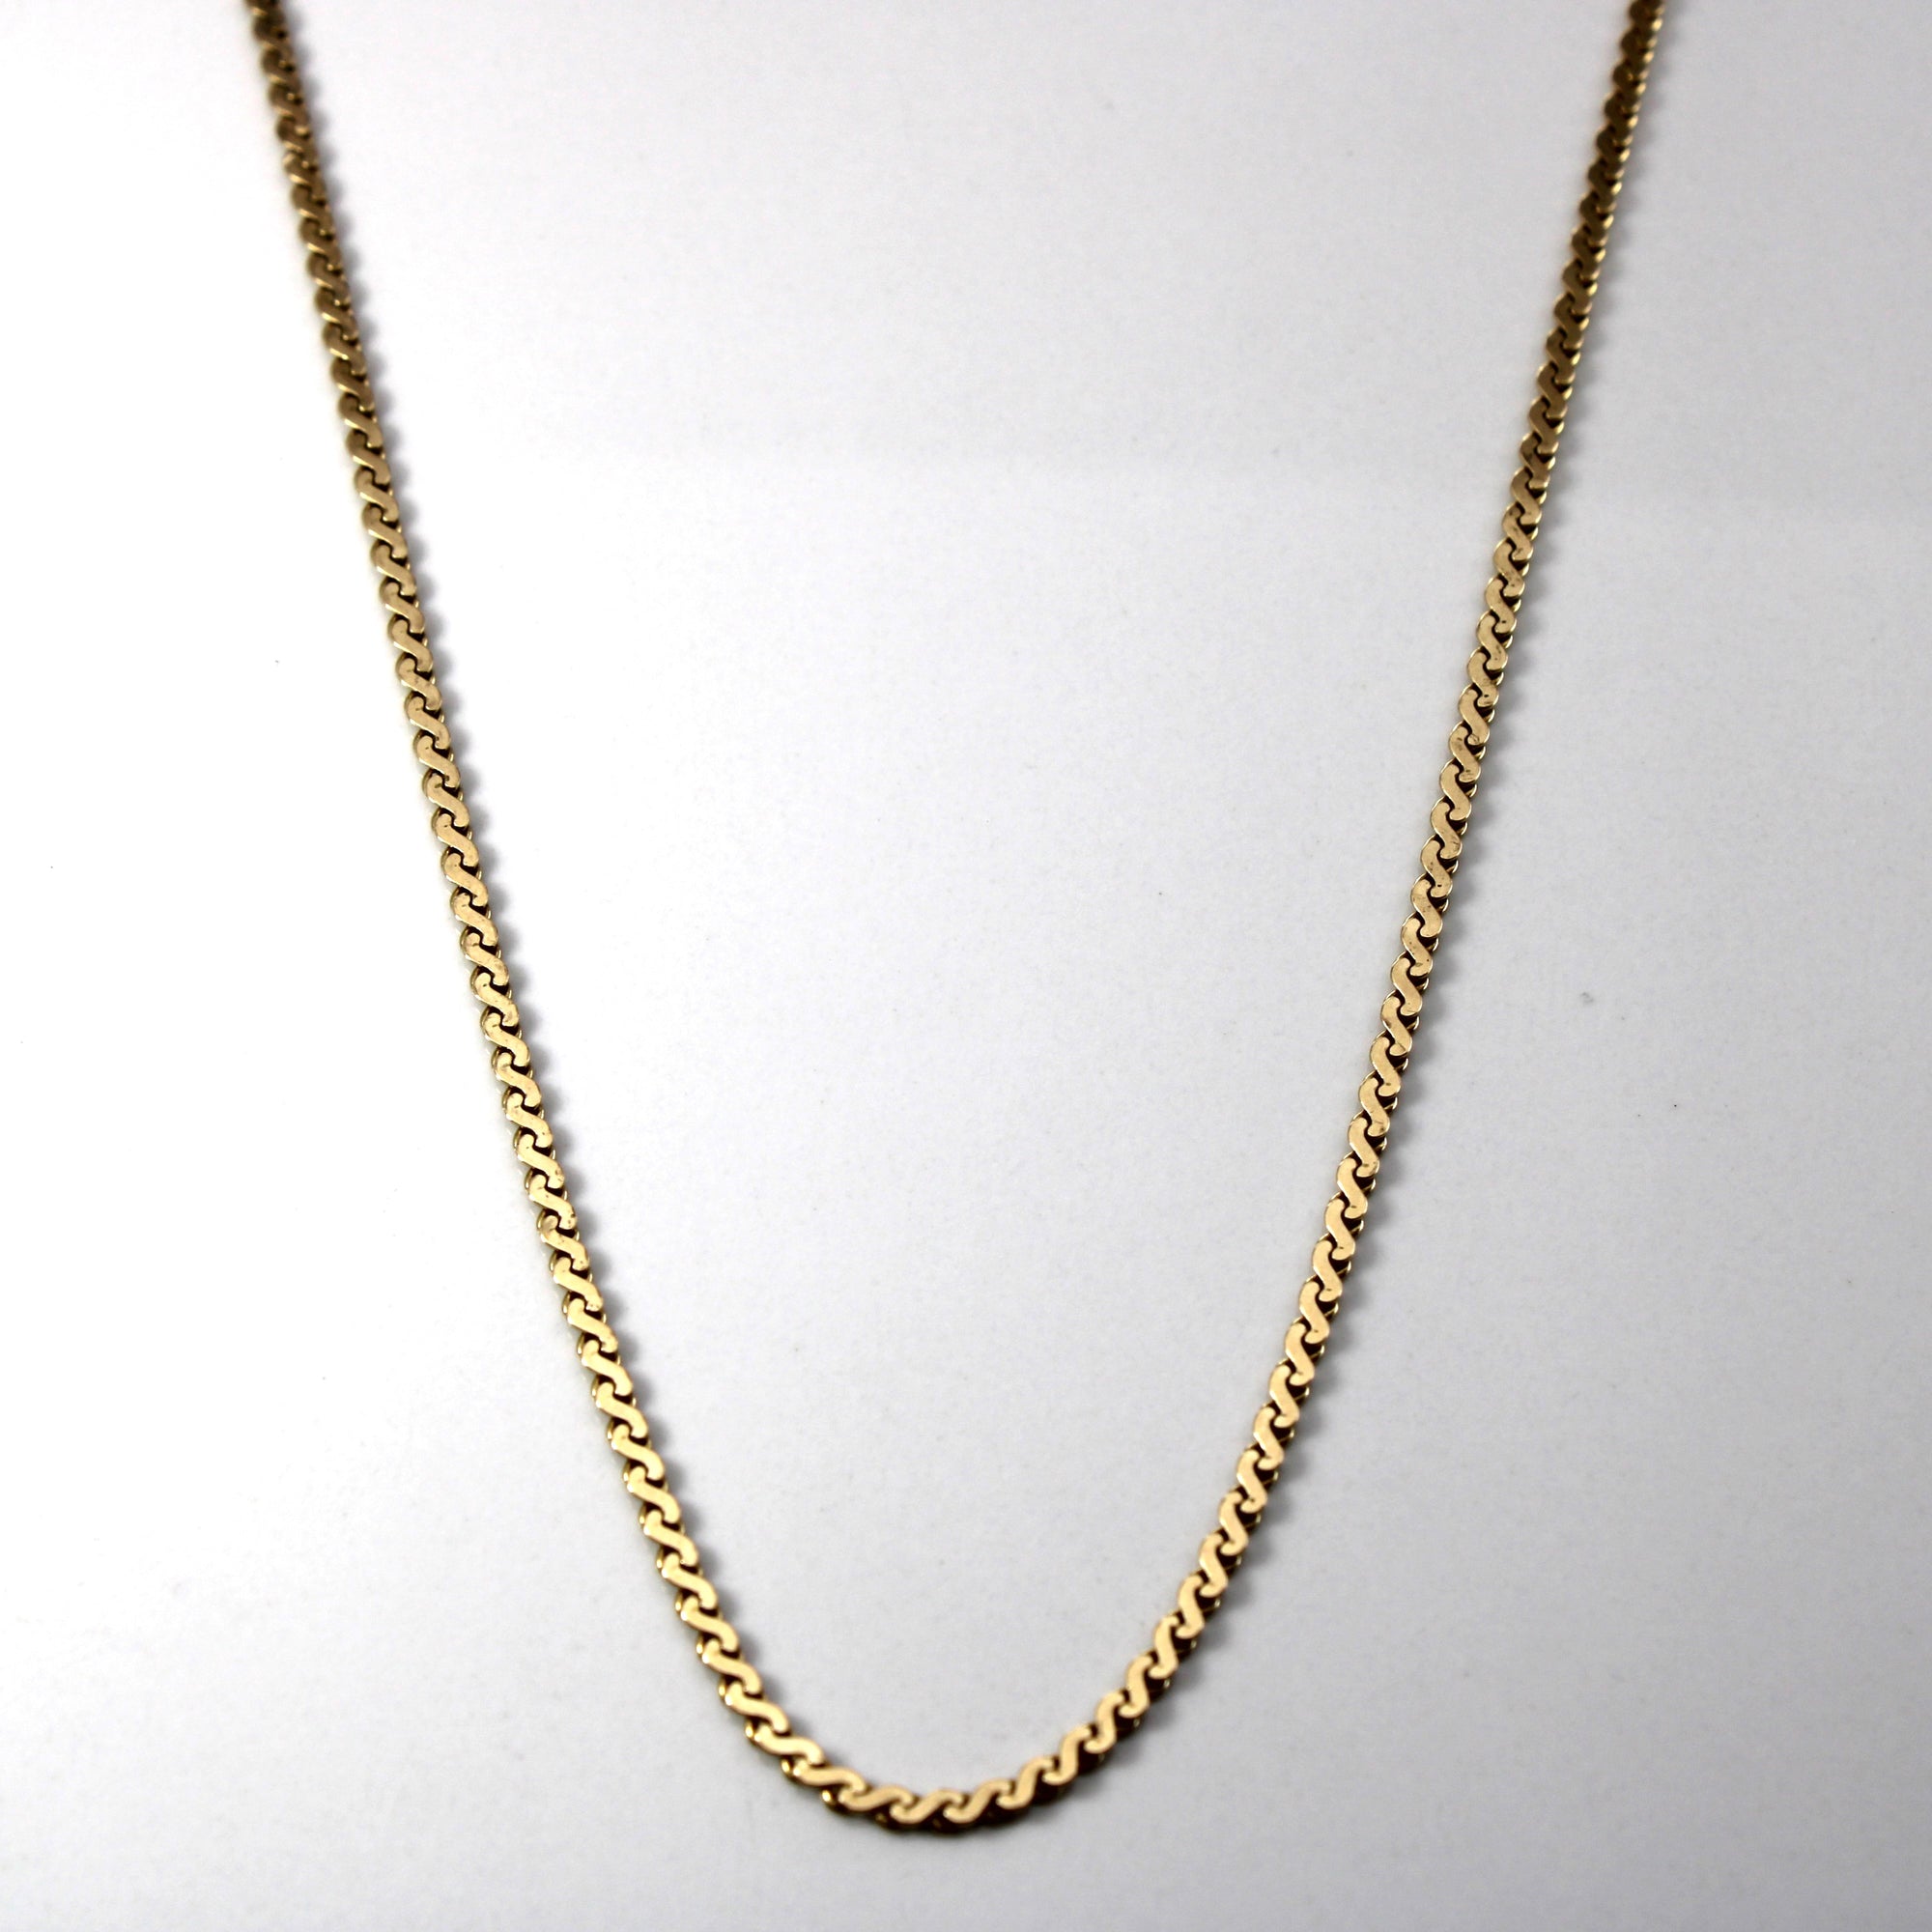 10k Yellow Gold S Link Chain | 22